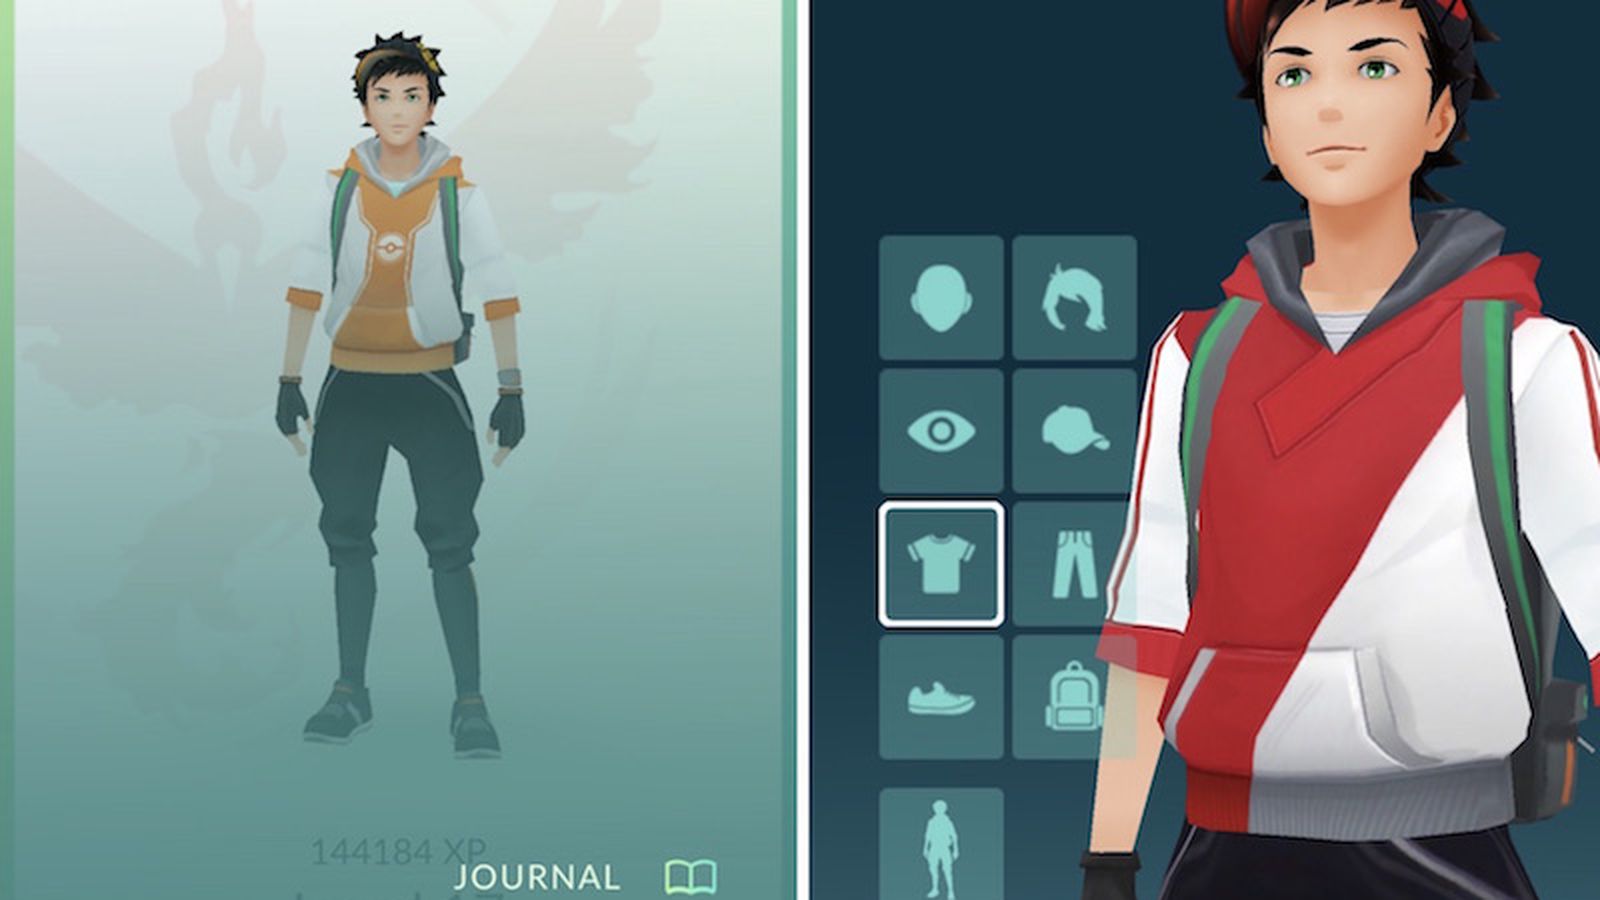 Pokemon Go Updates With Avatar Customization Removal Of Footstep Counter And More Macrumors